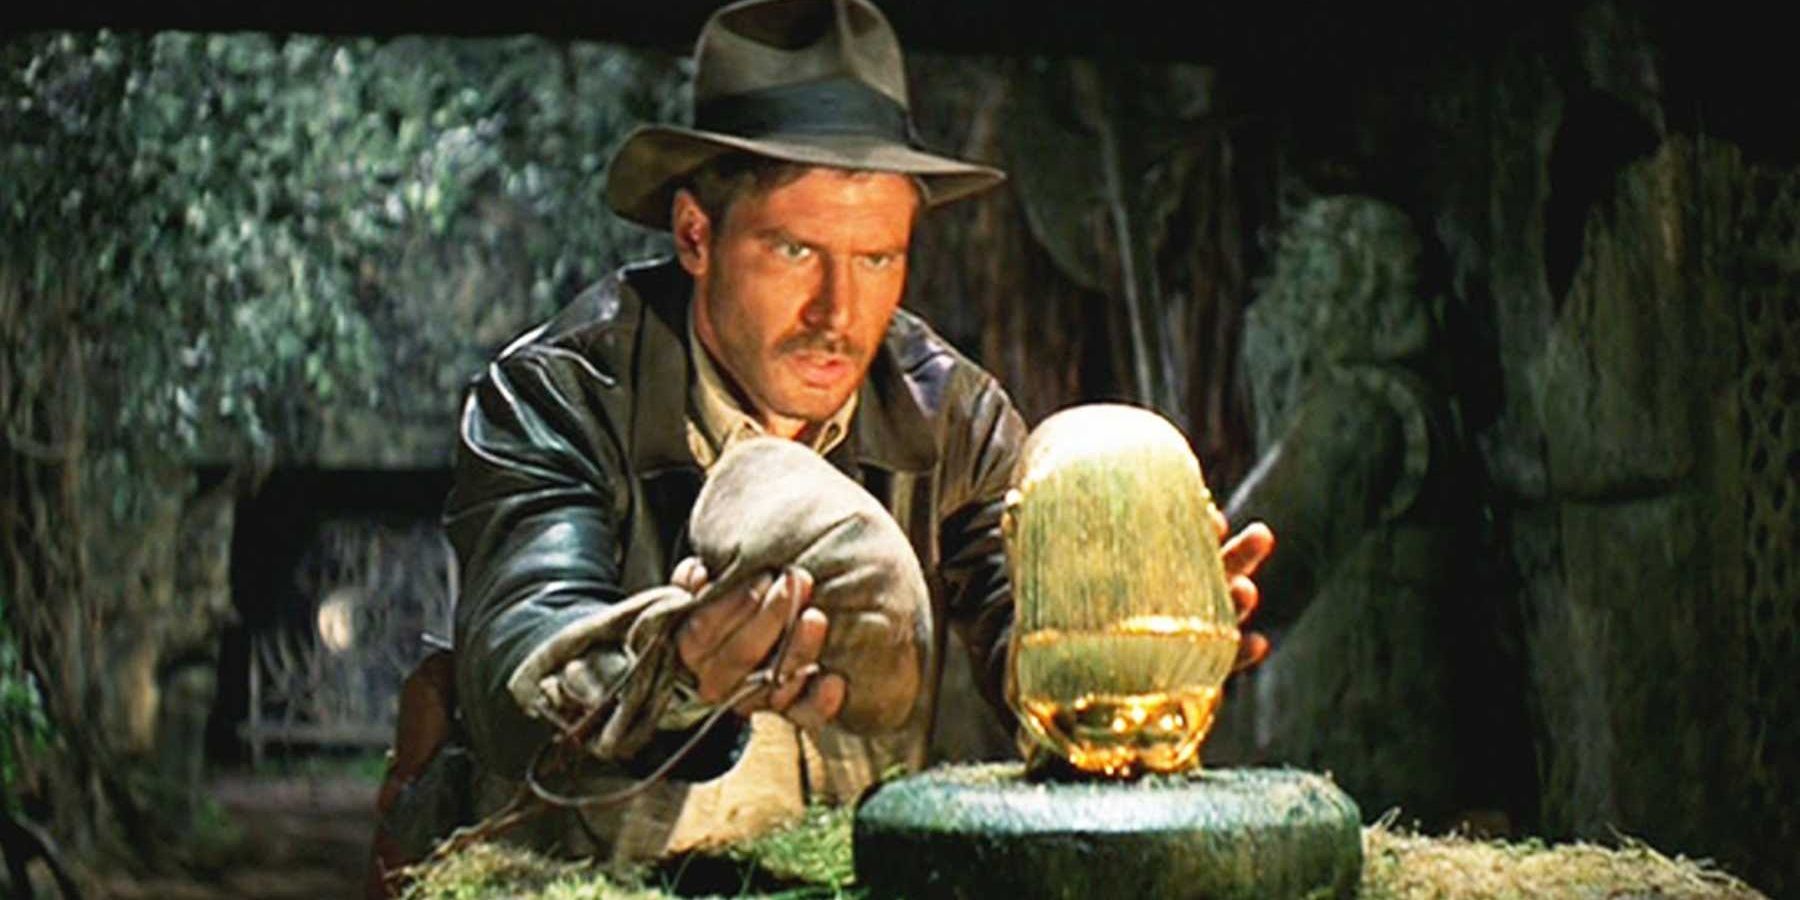 Indiana Jones prepares to replace the golden idol in Raiders of the Lost Ark